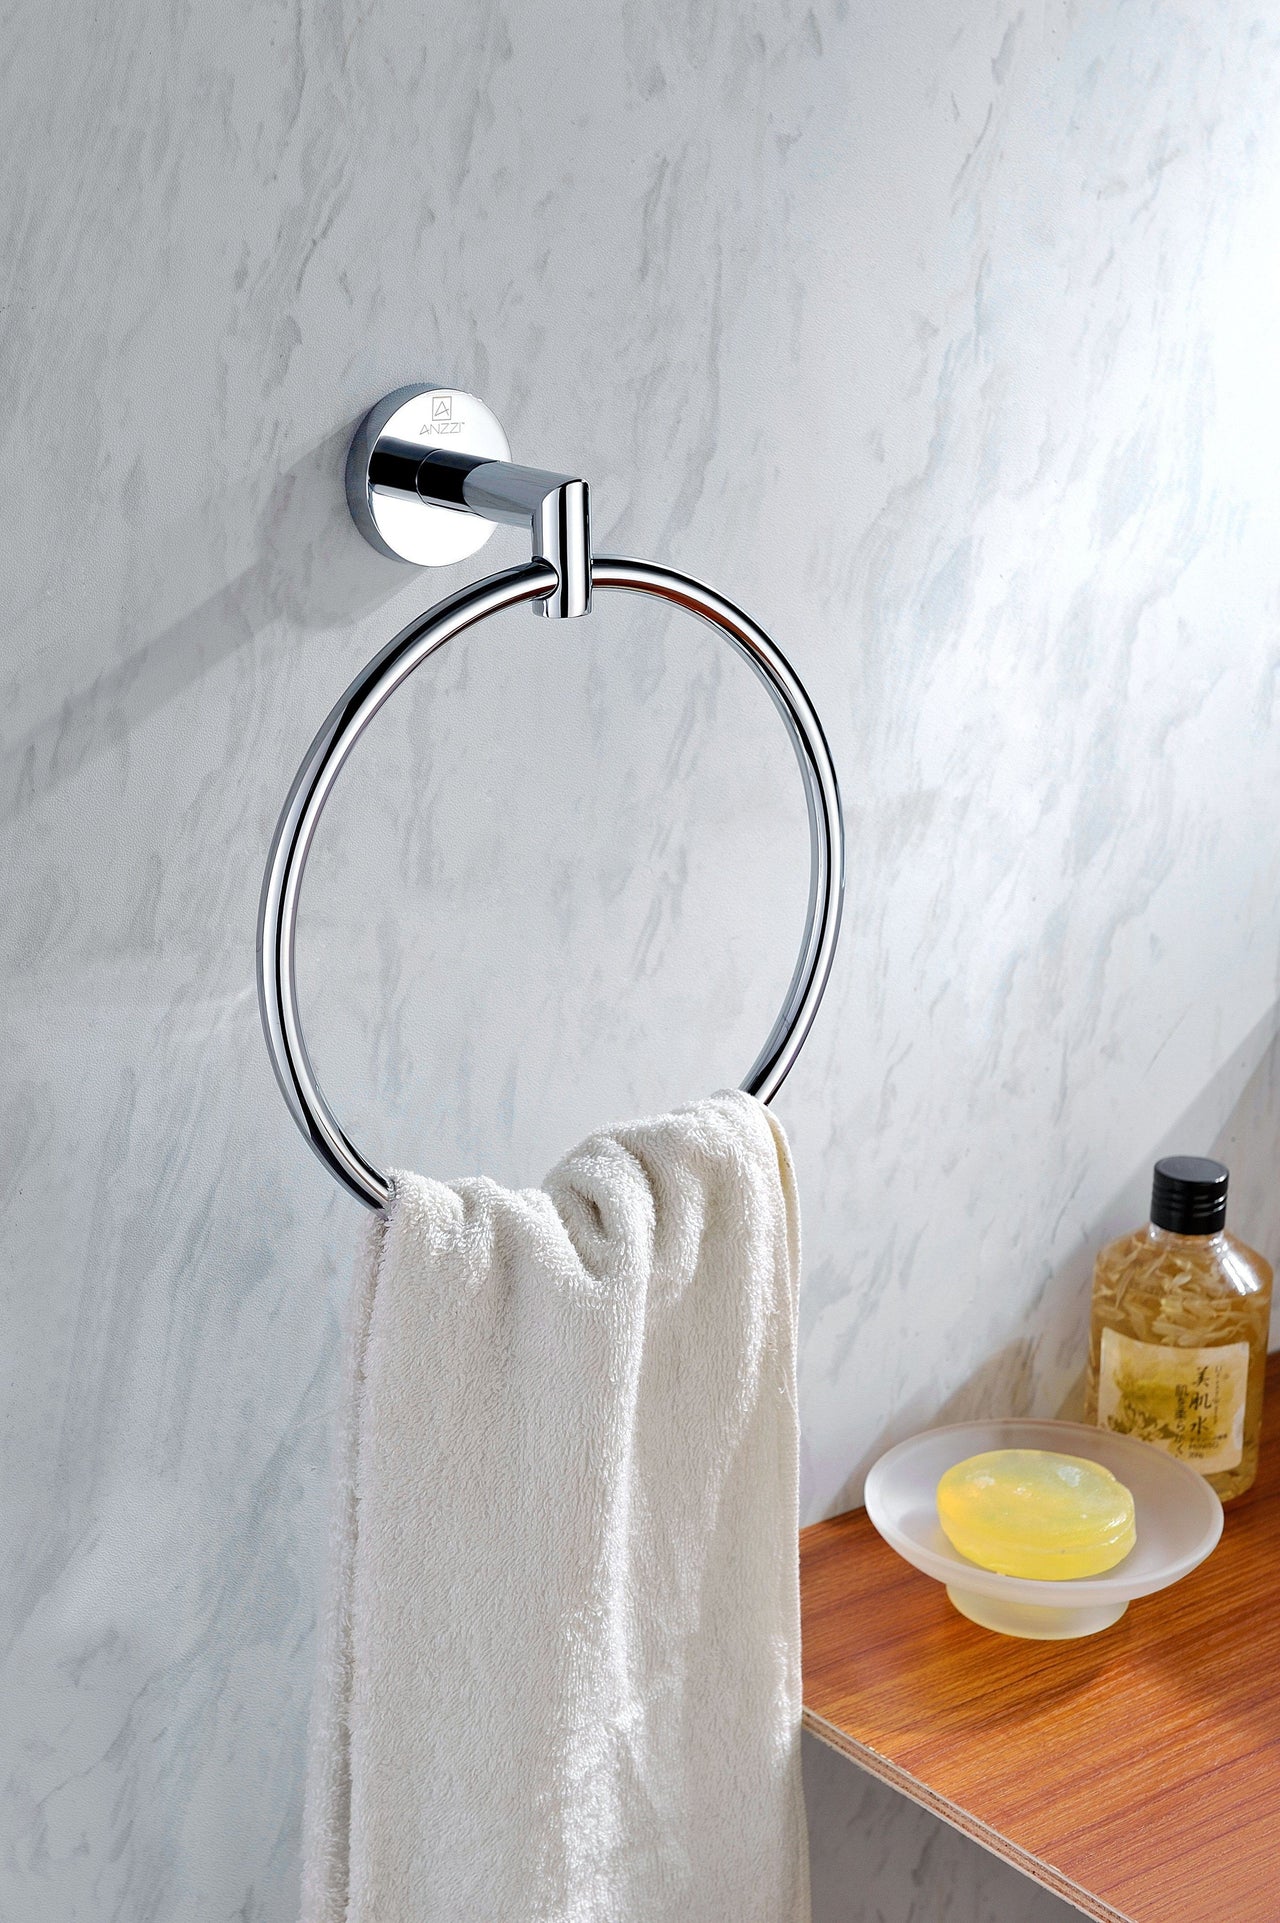 ANZZI Caster 2 Series Towel Ring in Polished Chrome Towel Ring ANZZI 